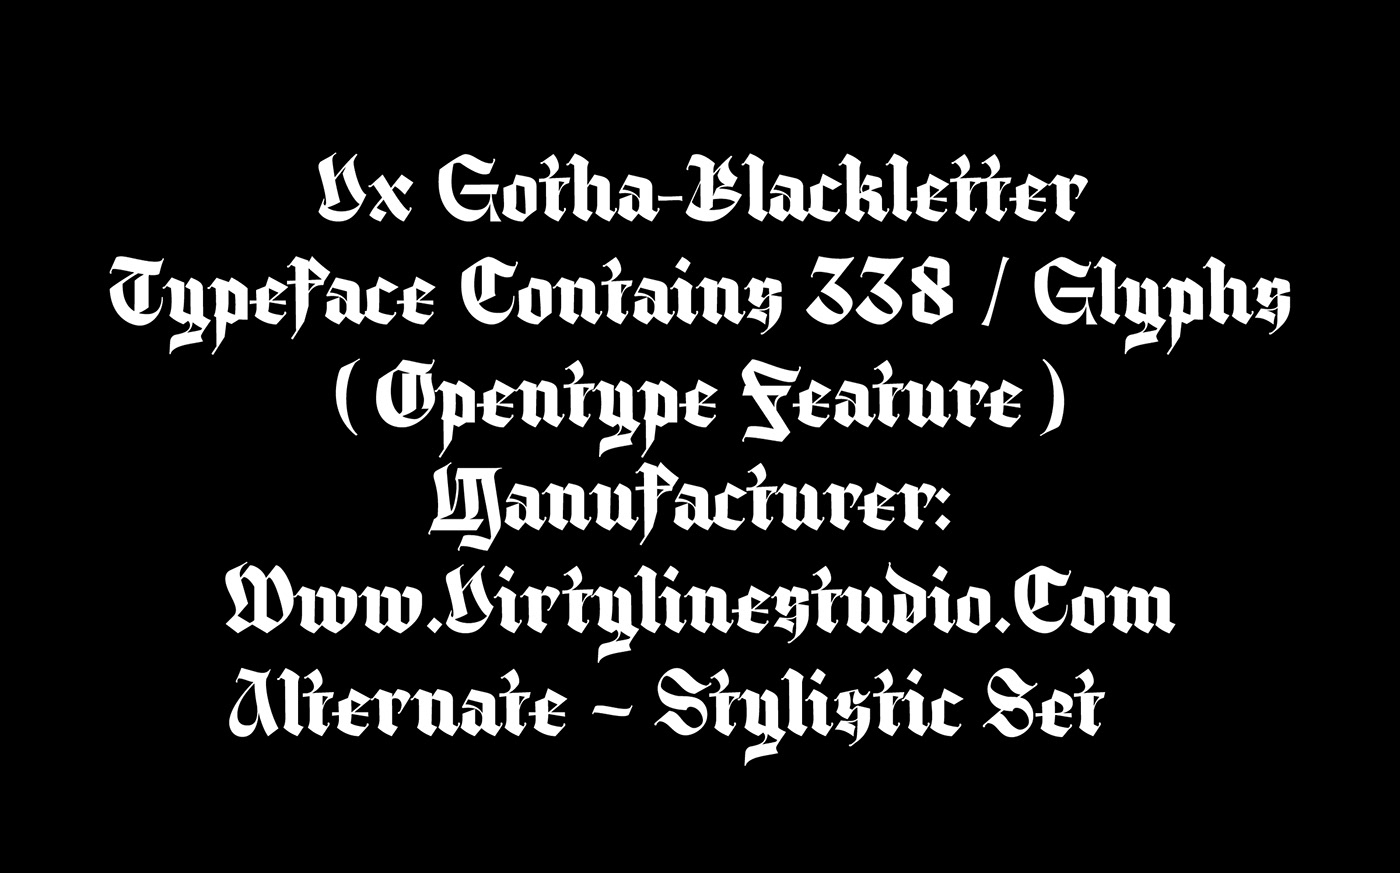 typography   Free font font Typeface Blackletter gothic Calligraphy   type Logotype lettering